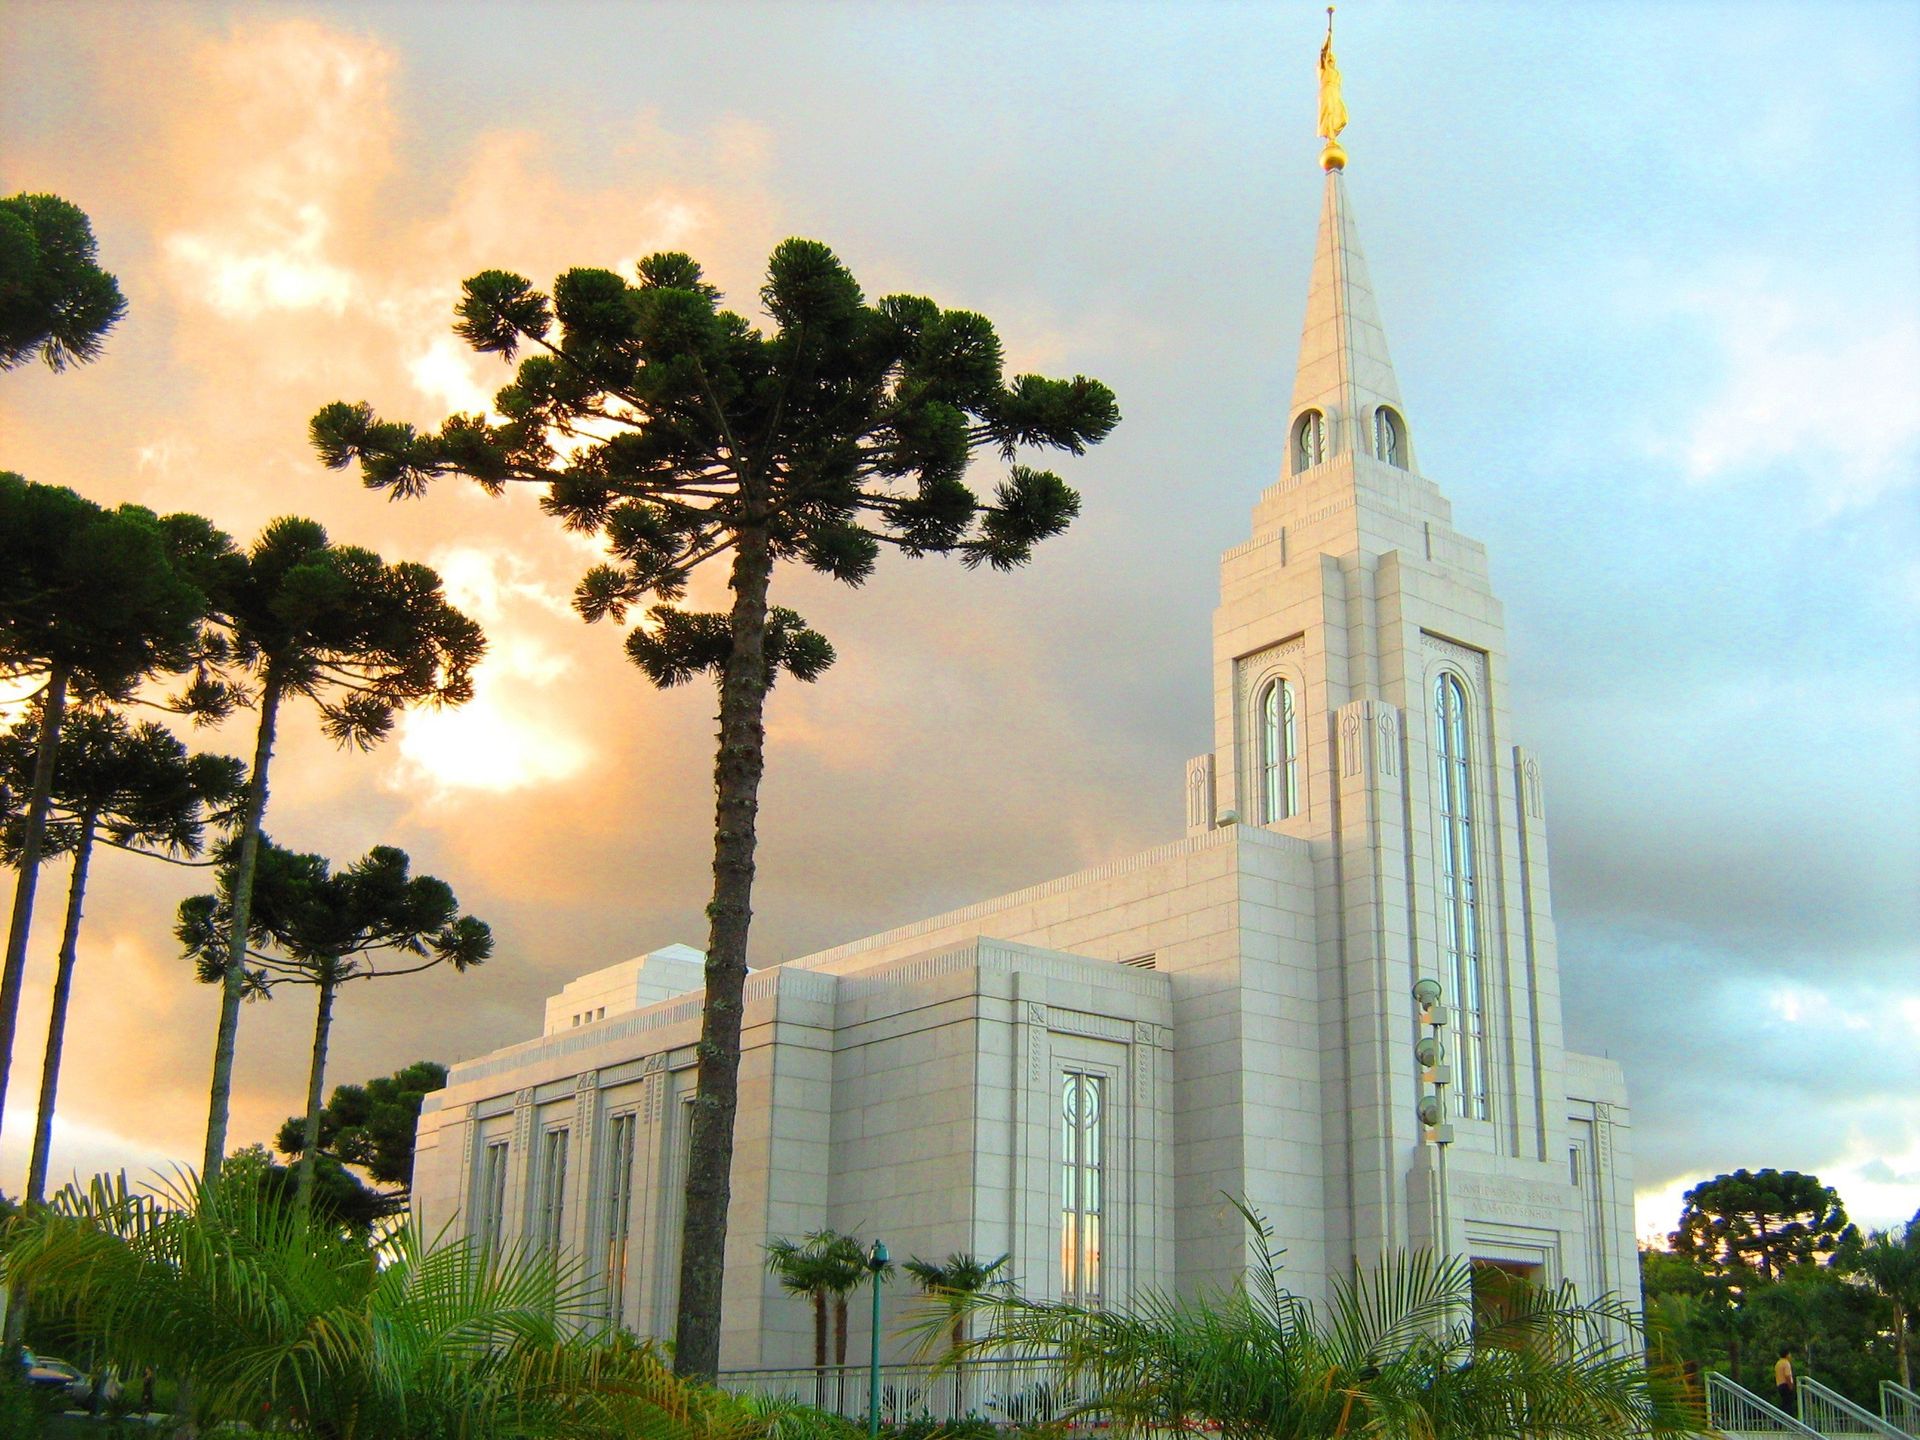 The Curitiba Brazil Temple at sunset, including entrance and scenery.